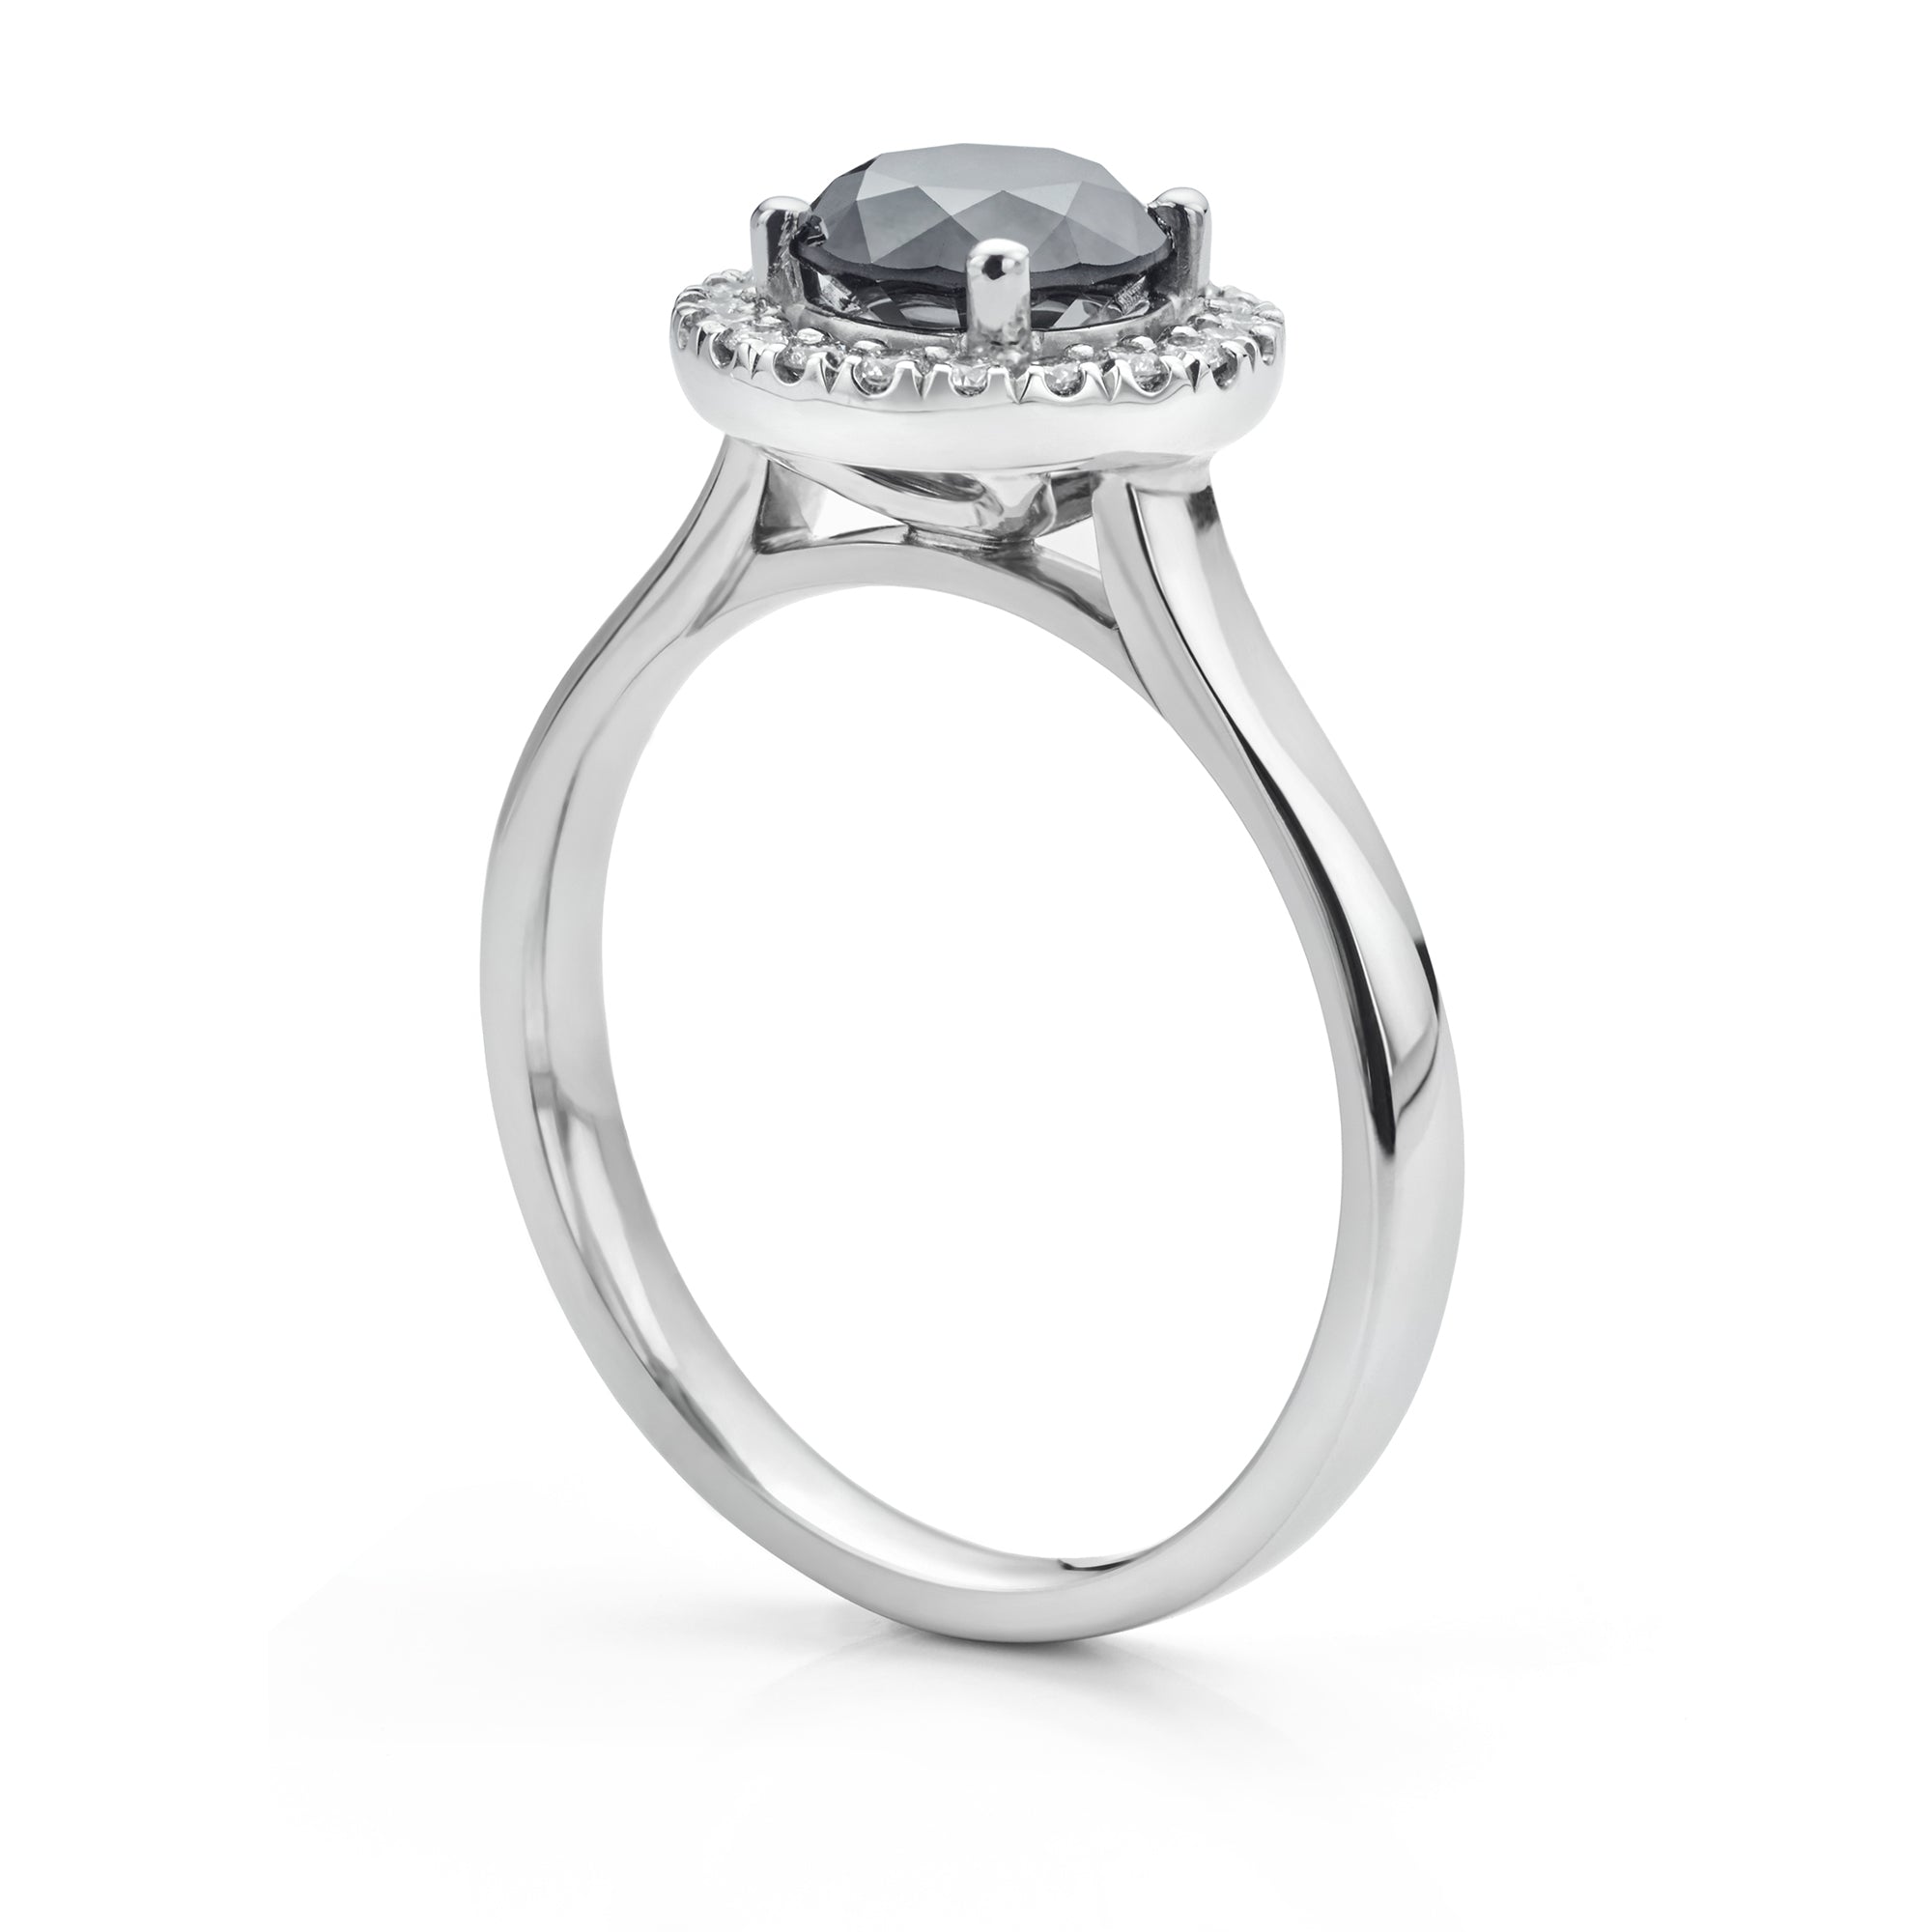 Side view of the black diamond halo engagement ring